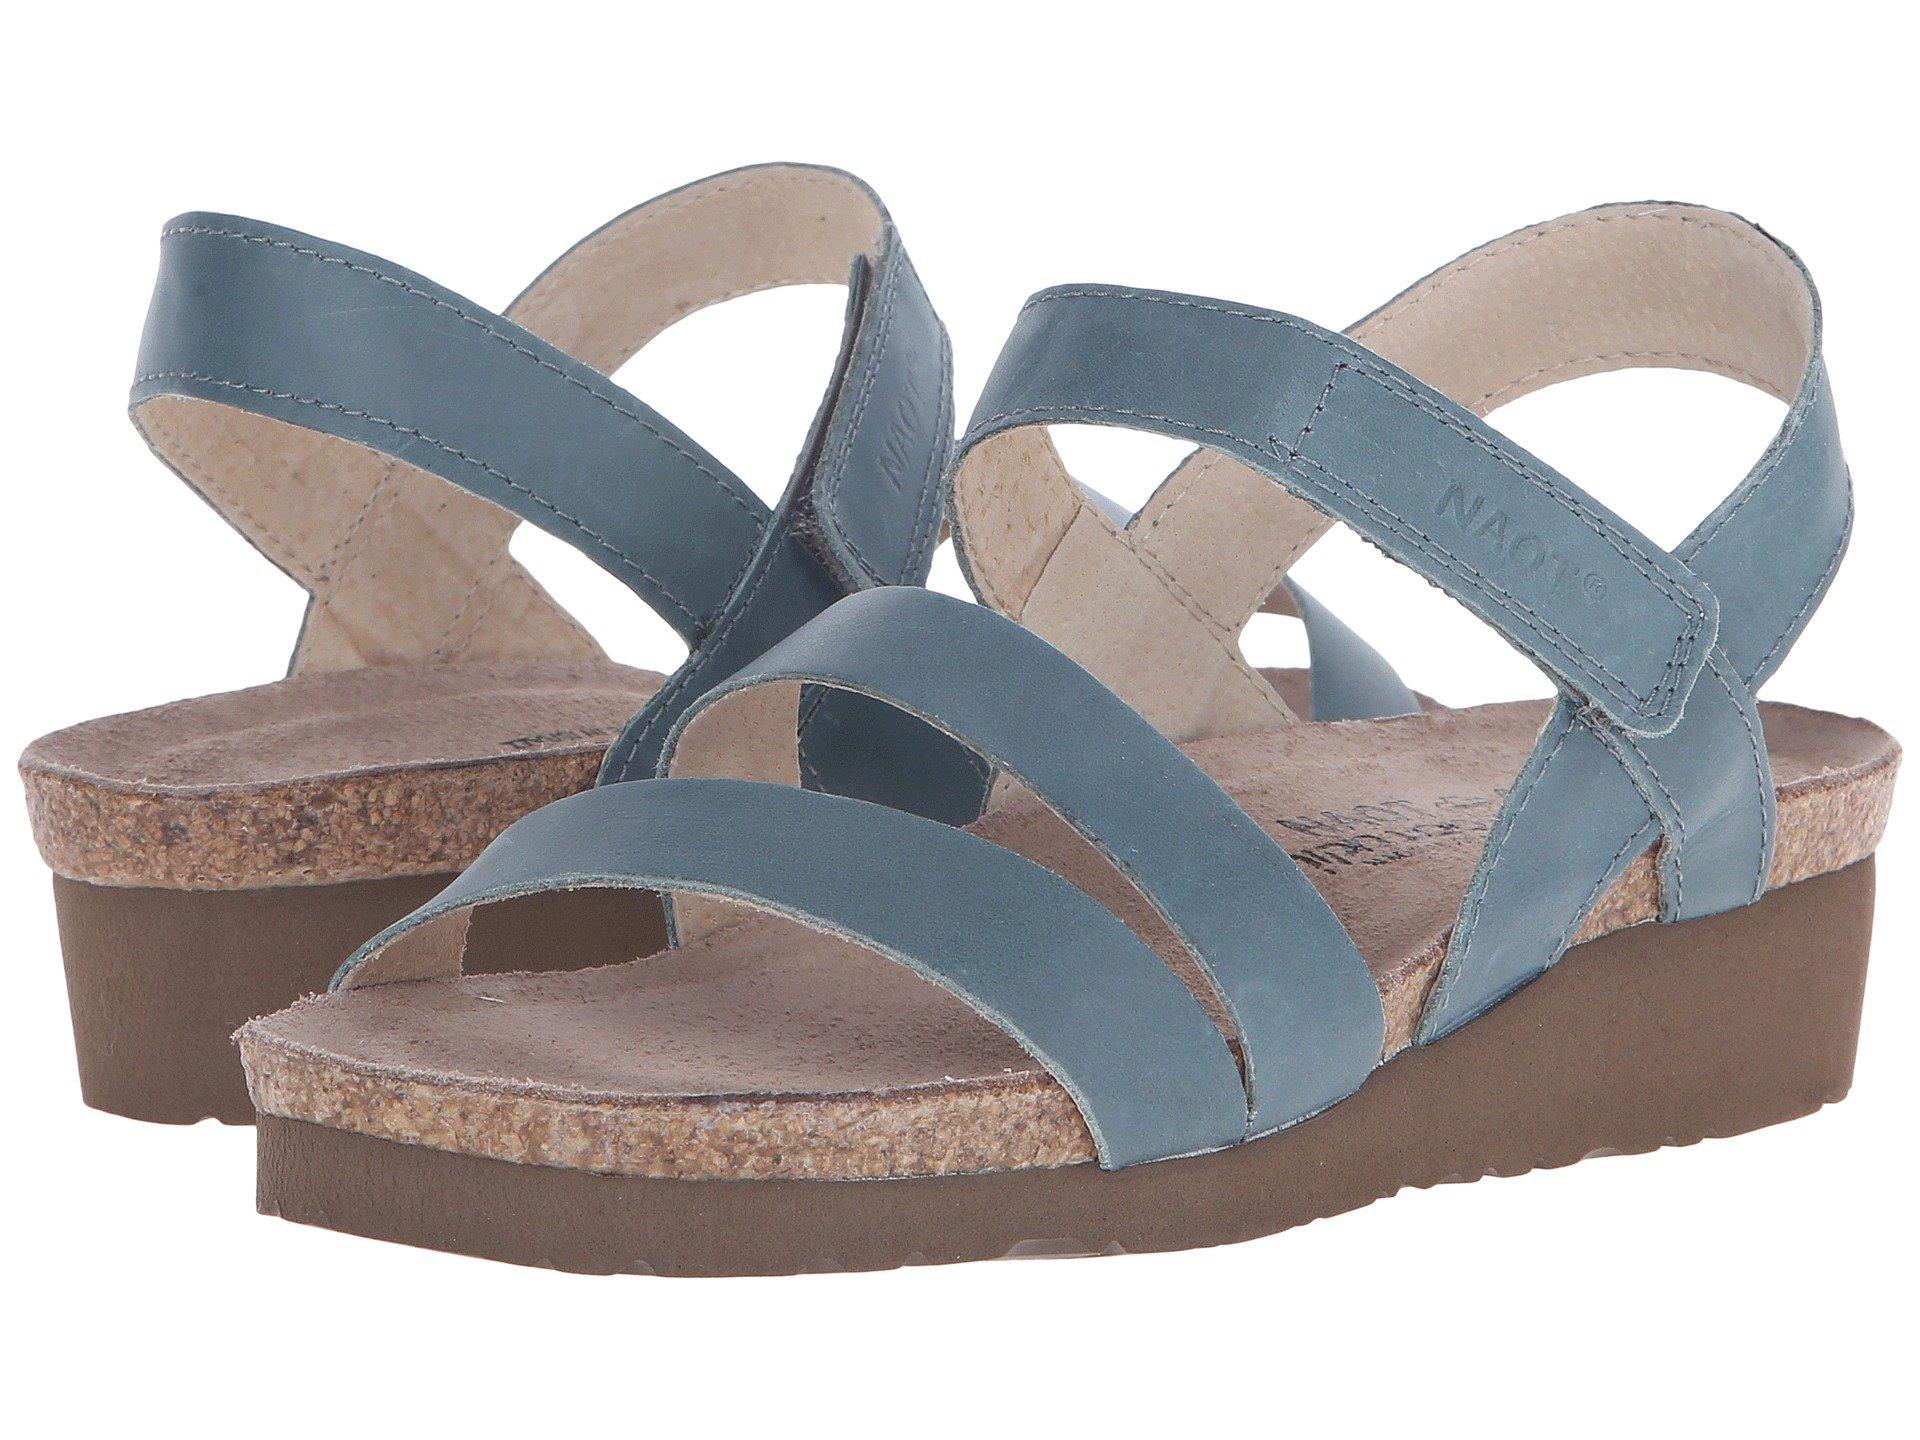 Naot Kayla Leather Sandals in Green (Natural) - Lyst